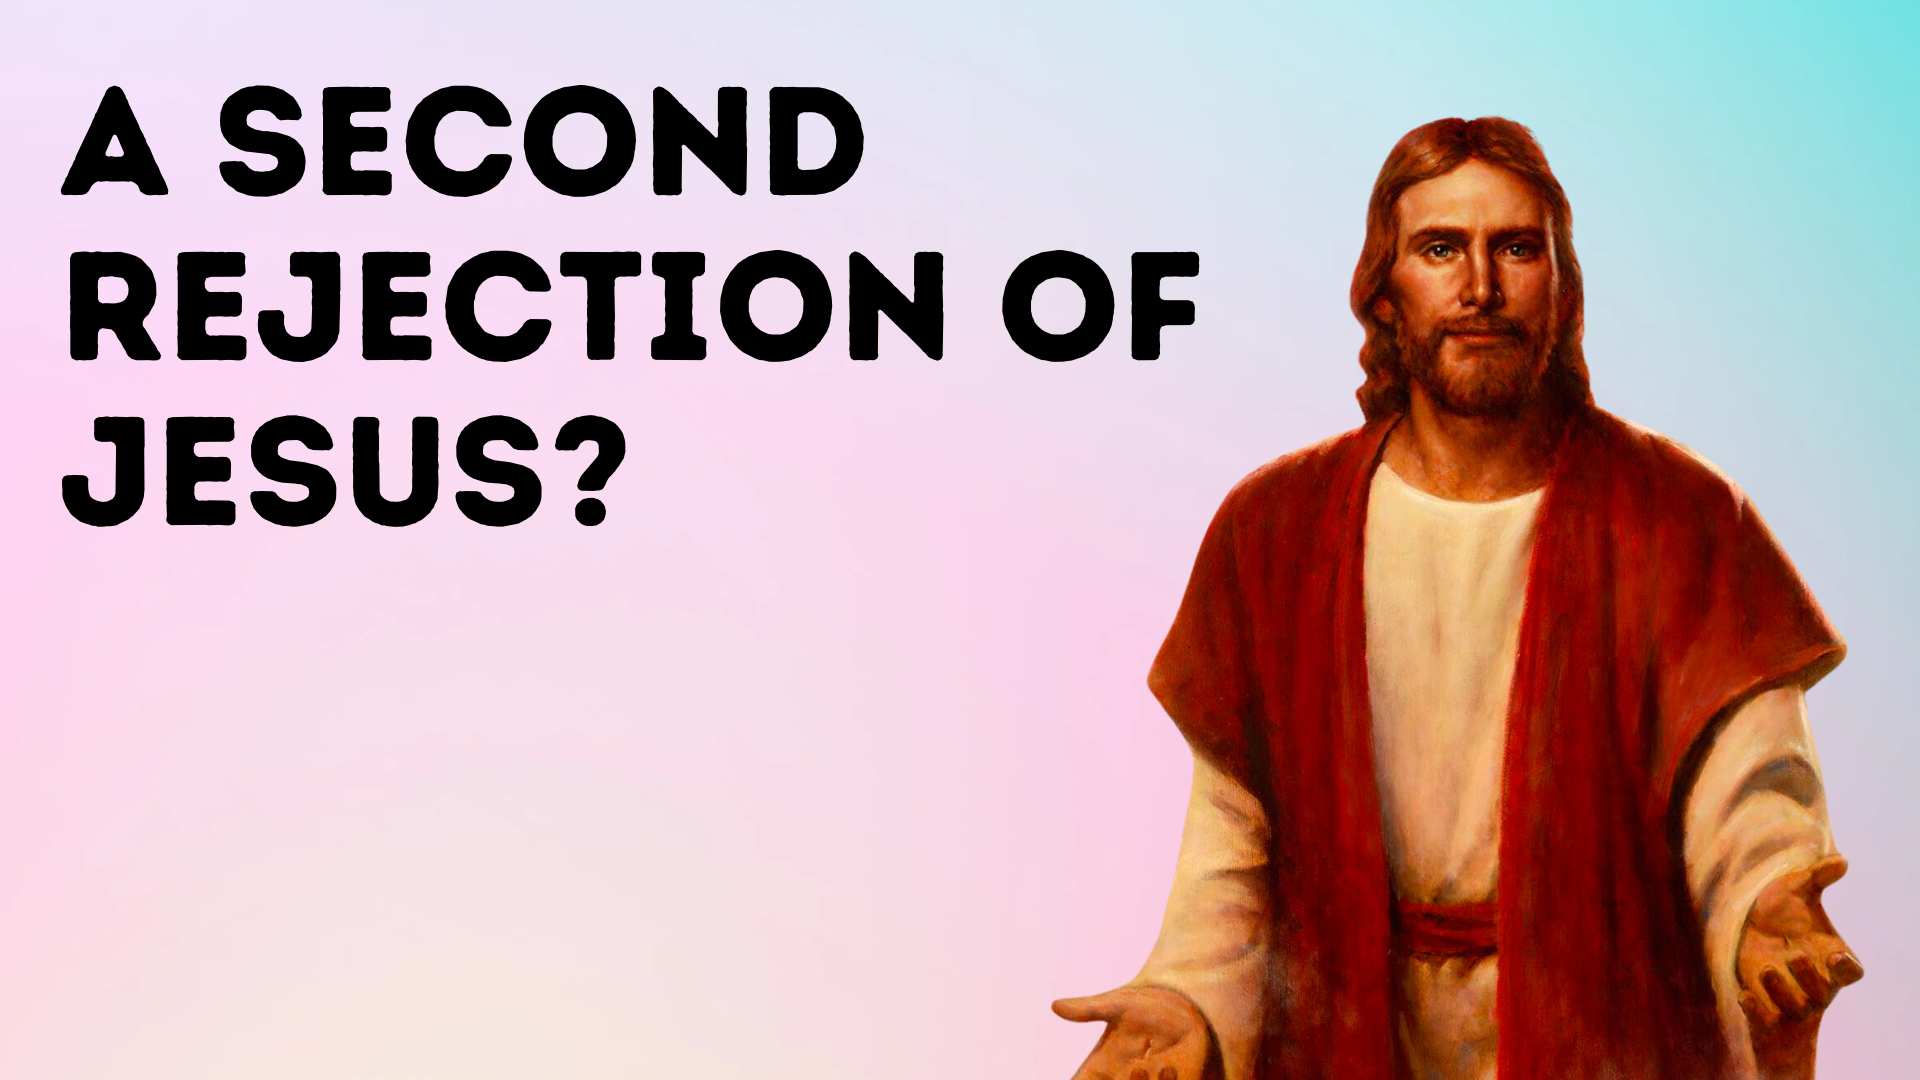 A Second Rejection of Jesus?